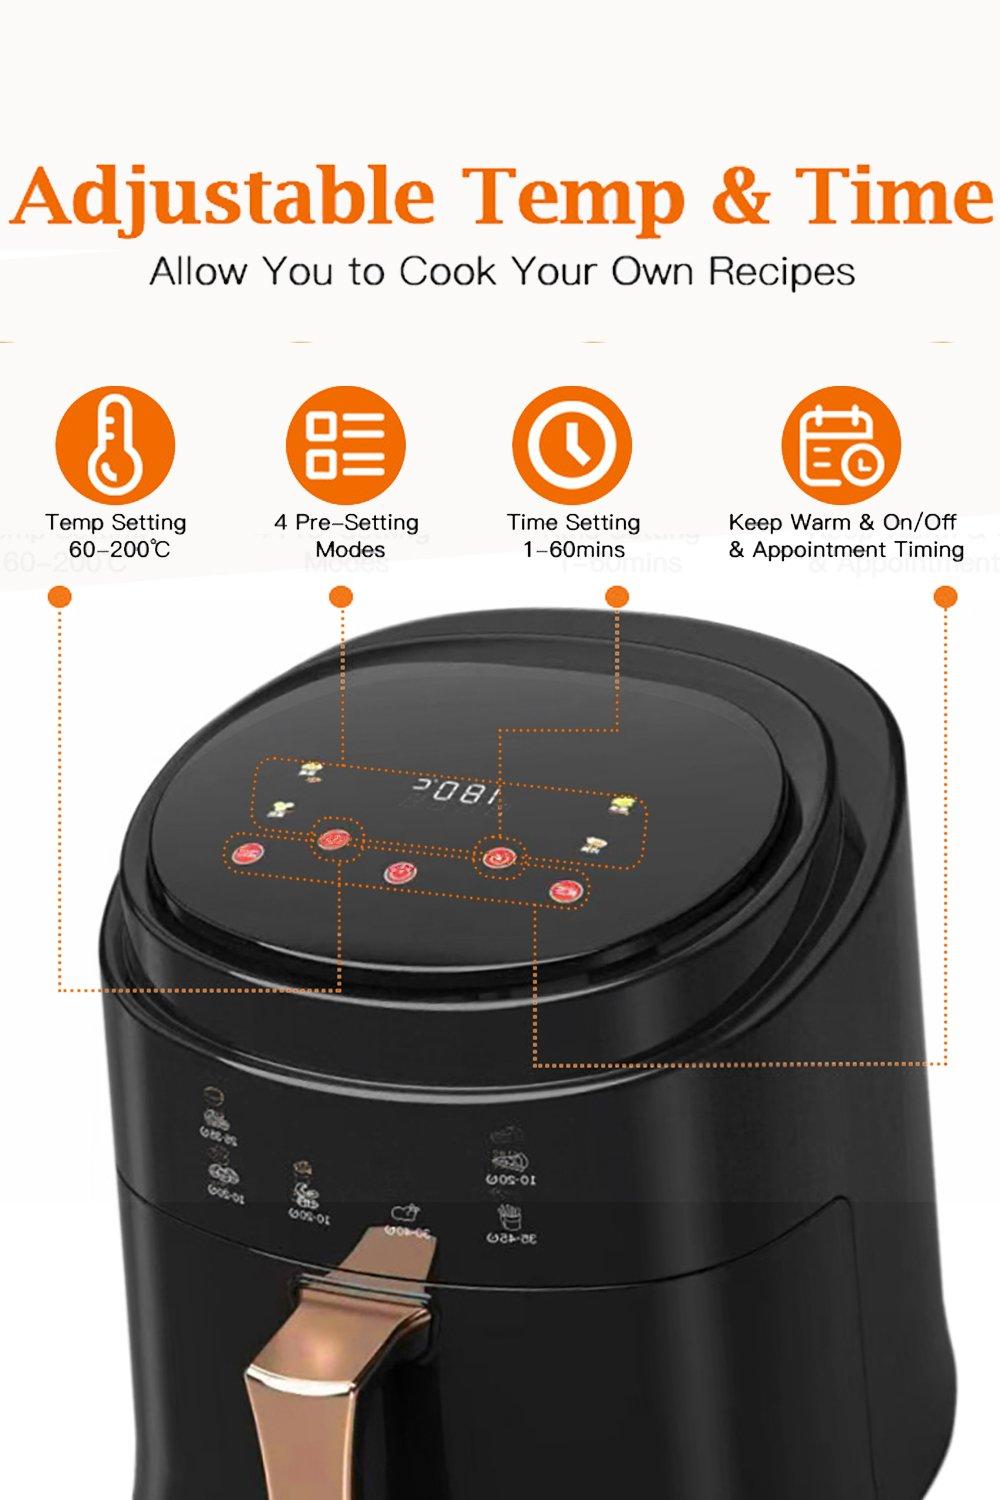 Living and Home DM0495 8L Black Touchscreen Air Fryer